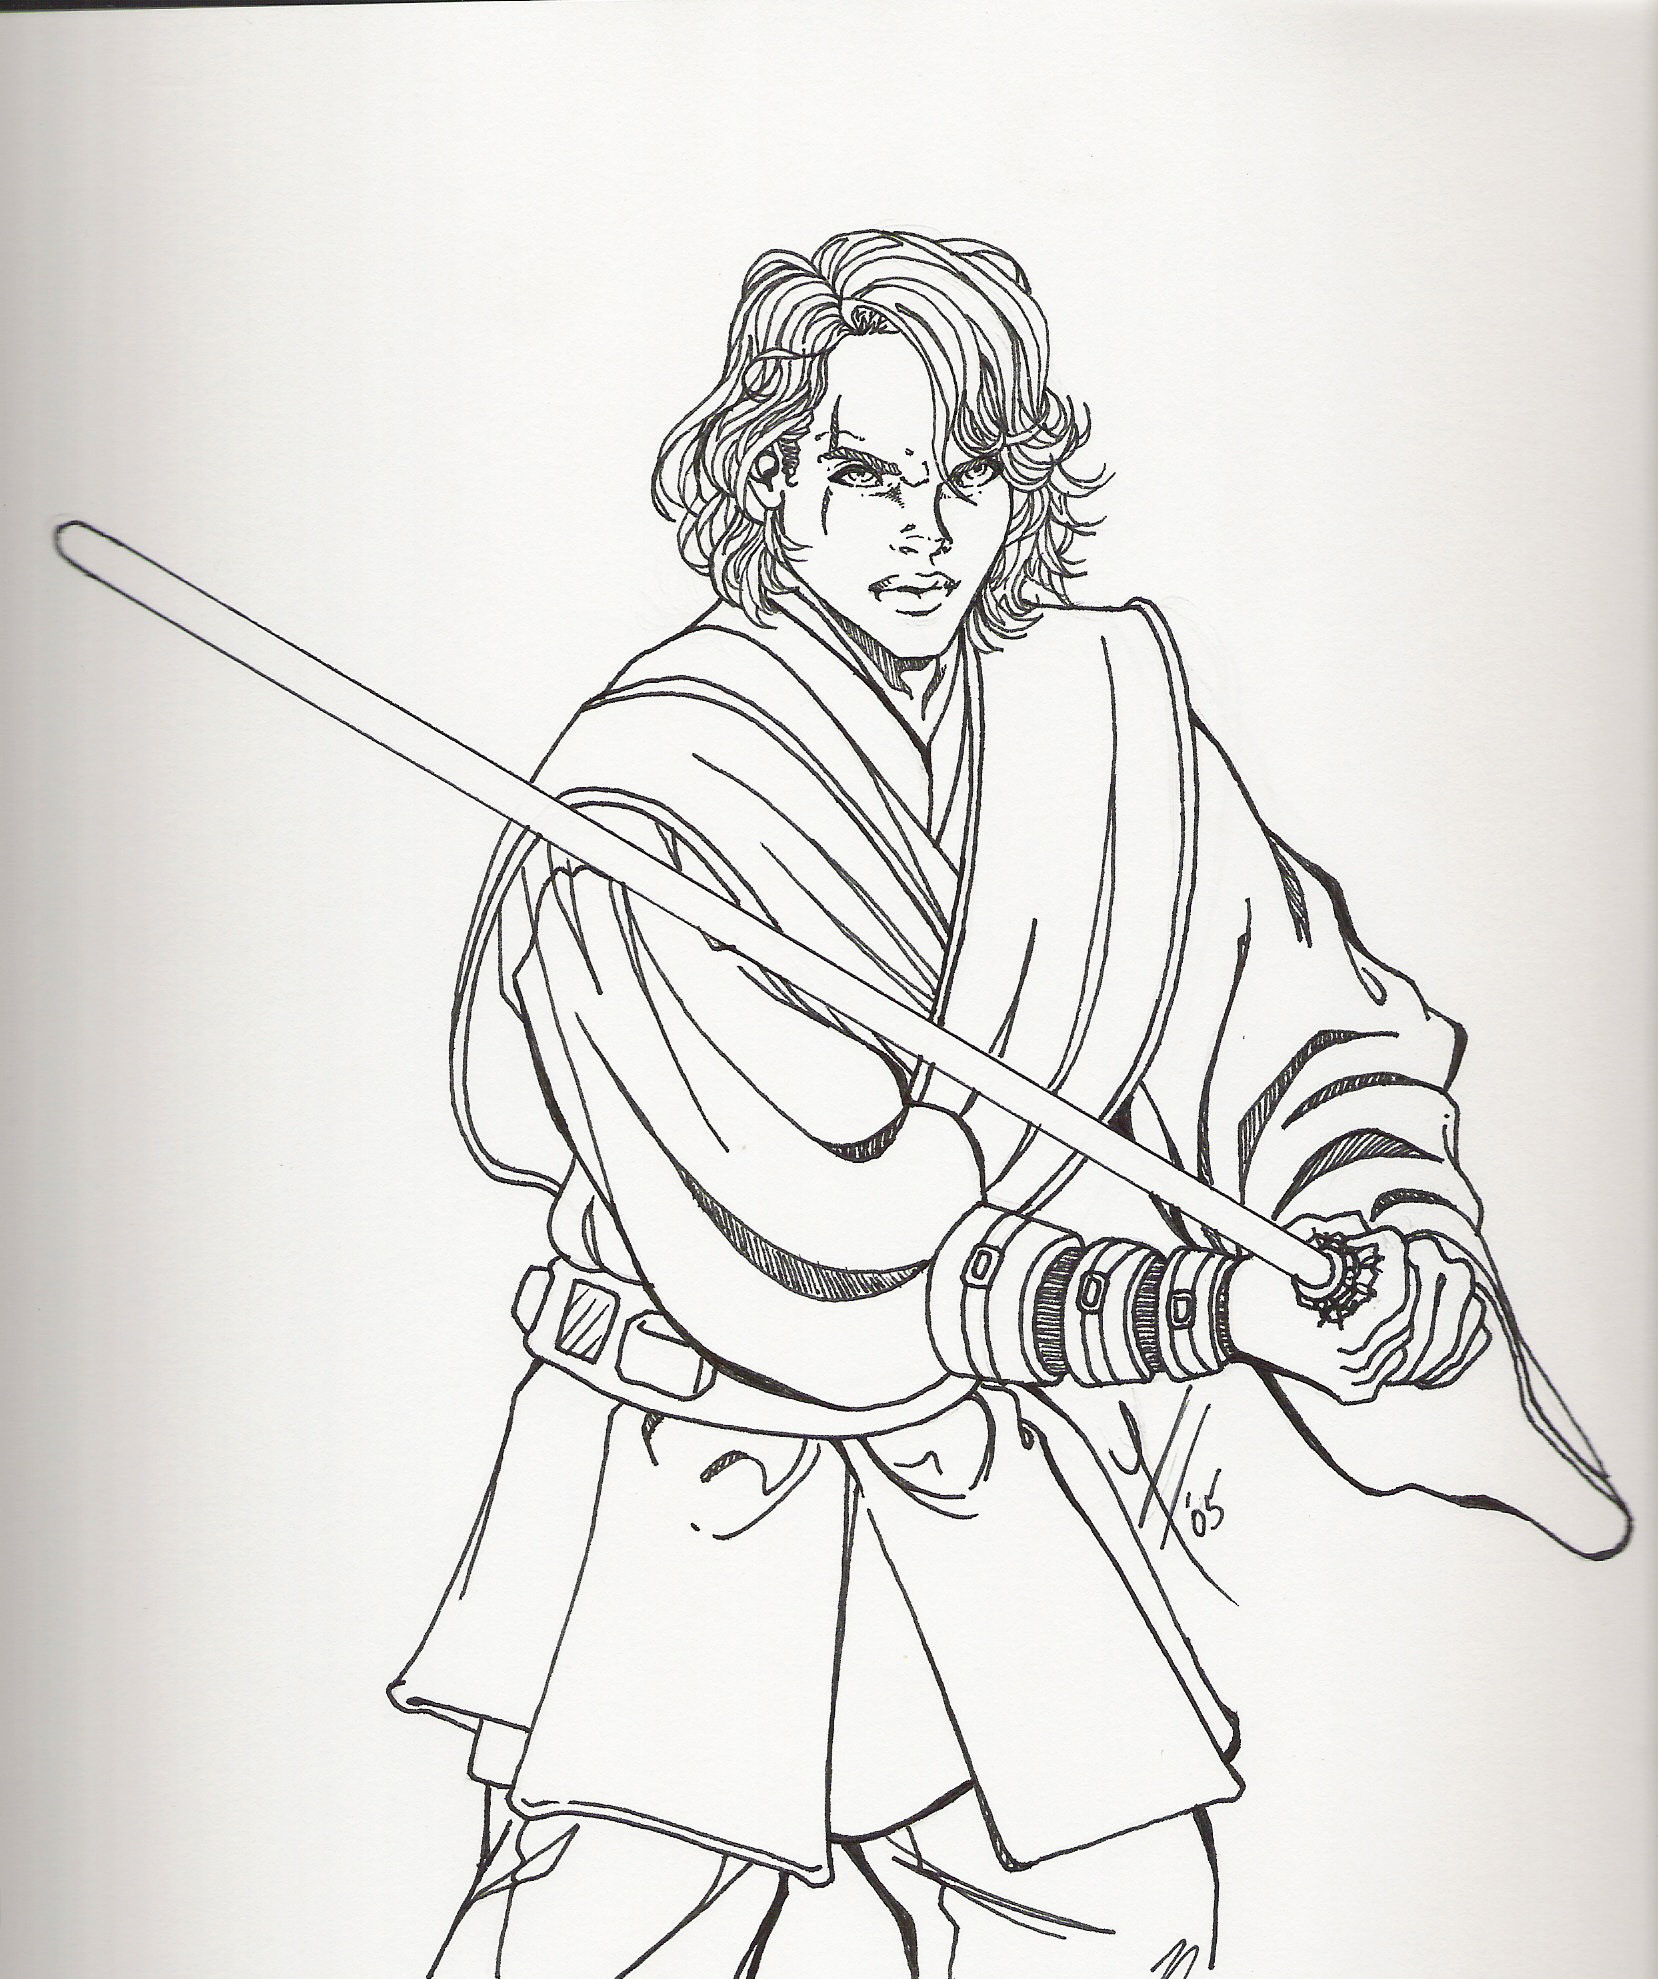 Star Wars Coloring Pages Anakin Skywalker at GetColorings.com | Free ...